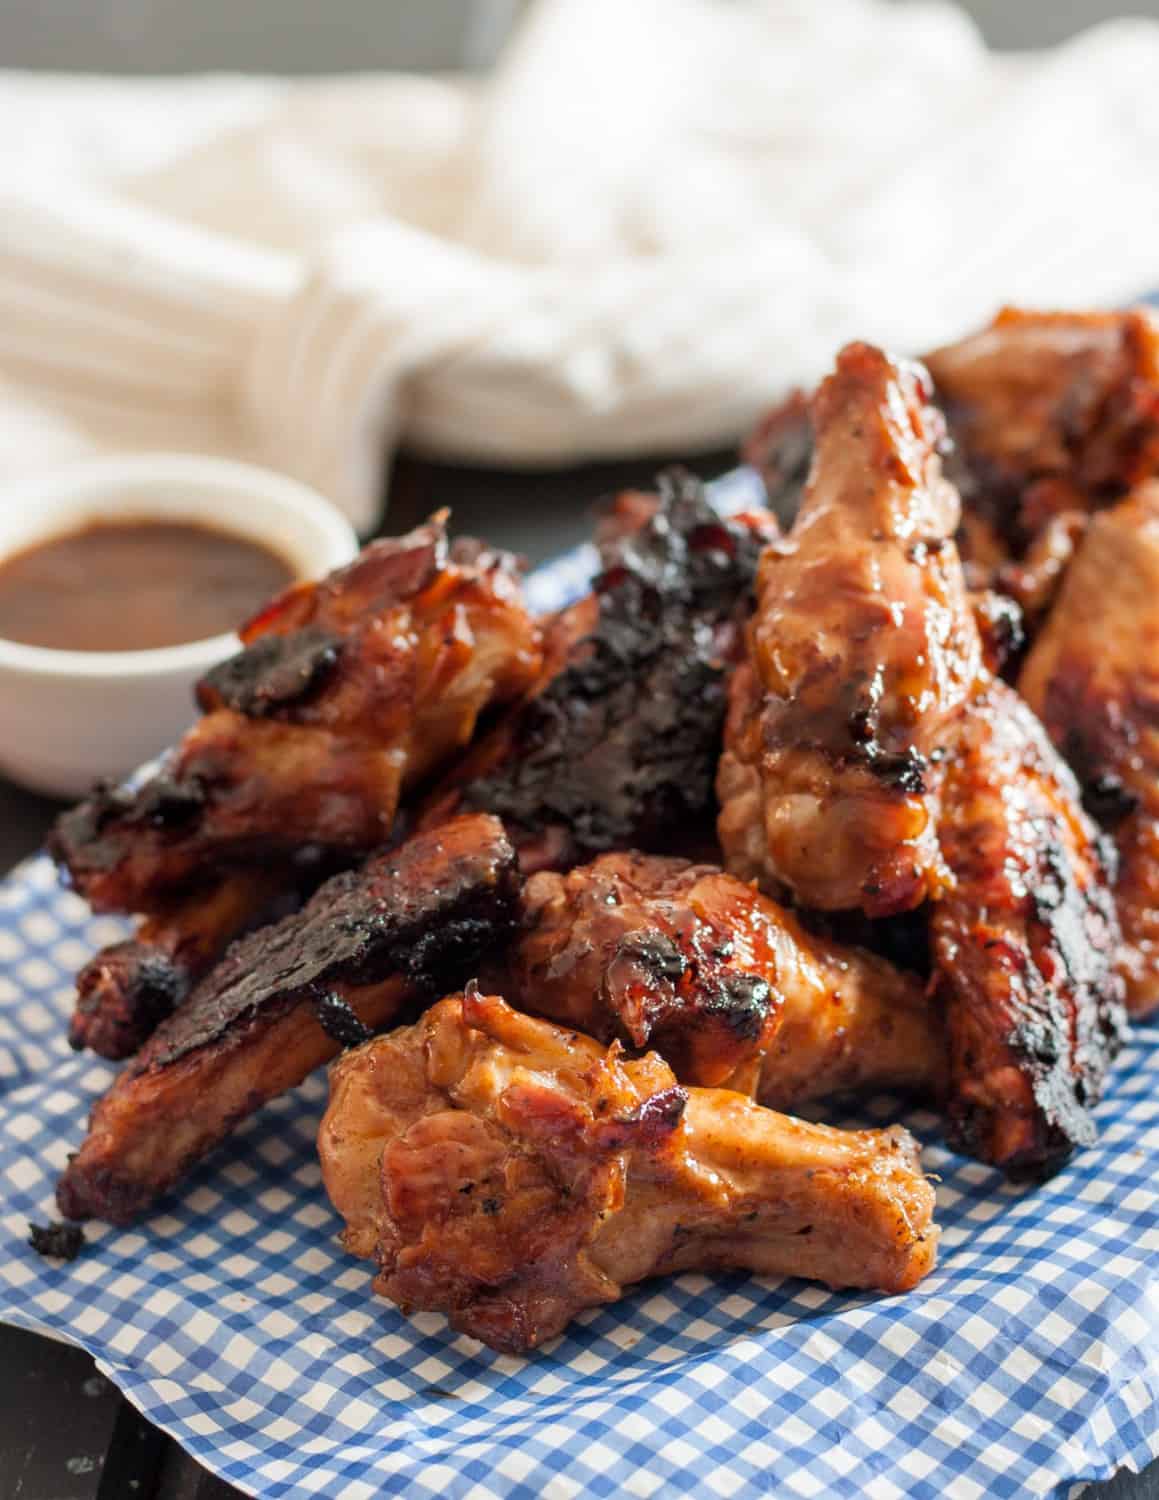 Chocolate porter grilled chicken wings are sweet and smoky with a hint of heat. A perfect unique grilled chicken wing recipe to enjoy this summer! * GoodieGodmother.com